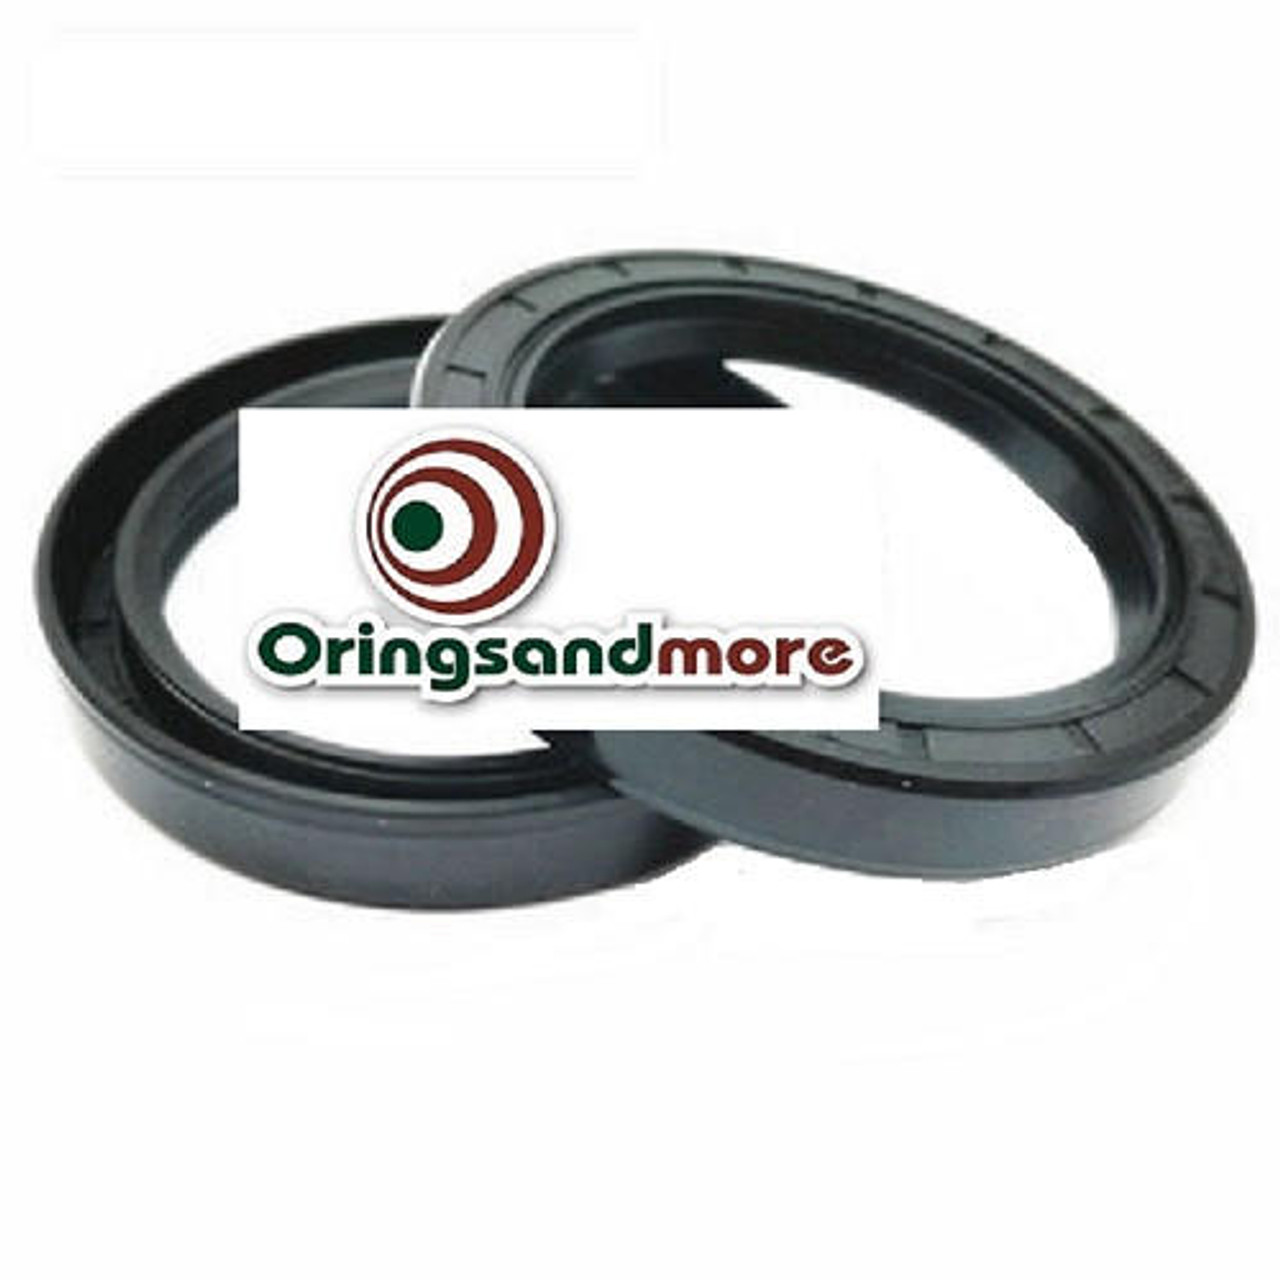 Metric Oil Shaft Seal 50 x 80 x 12mm Double Lip   Price for 1 pc